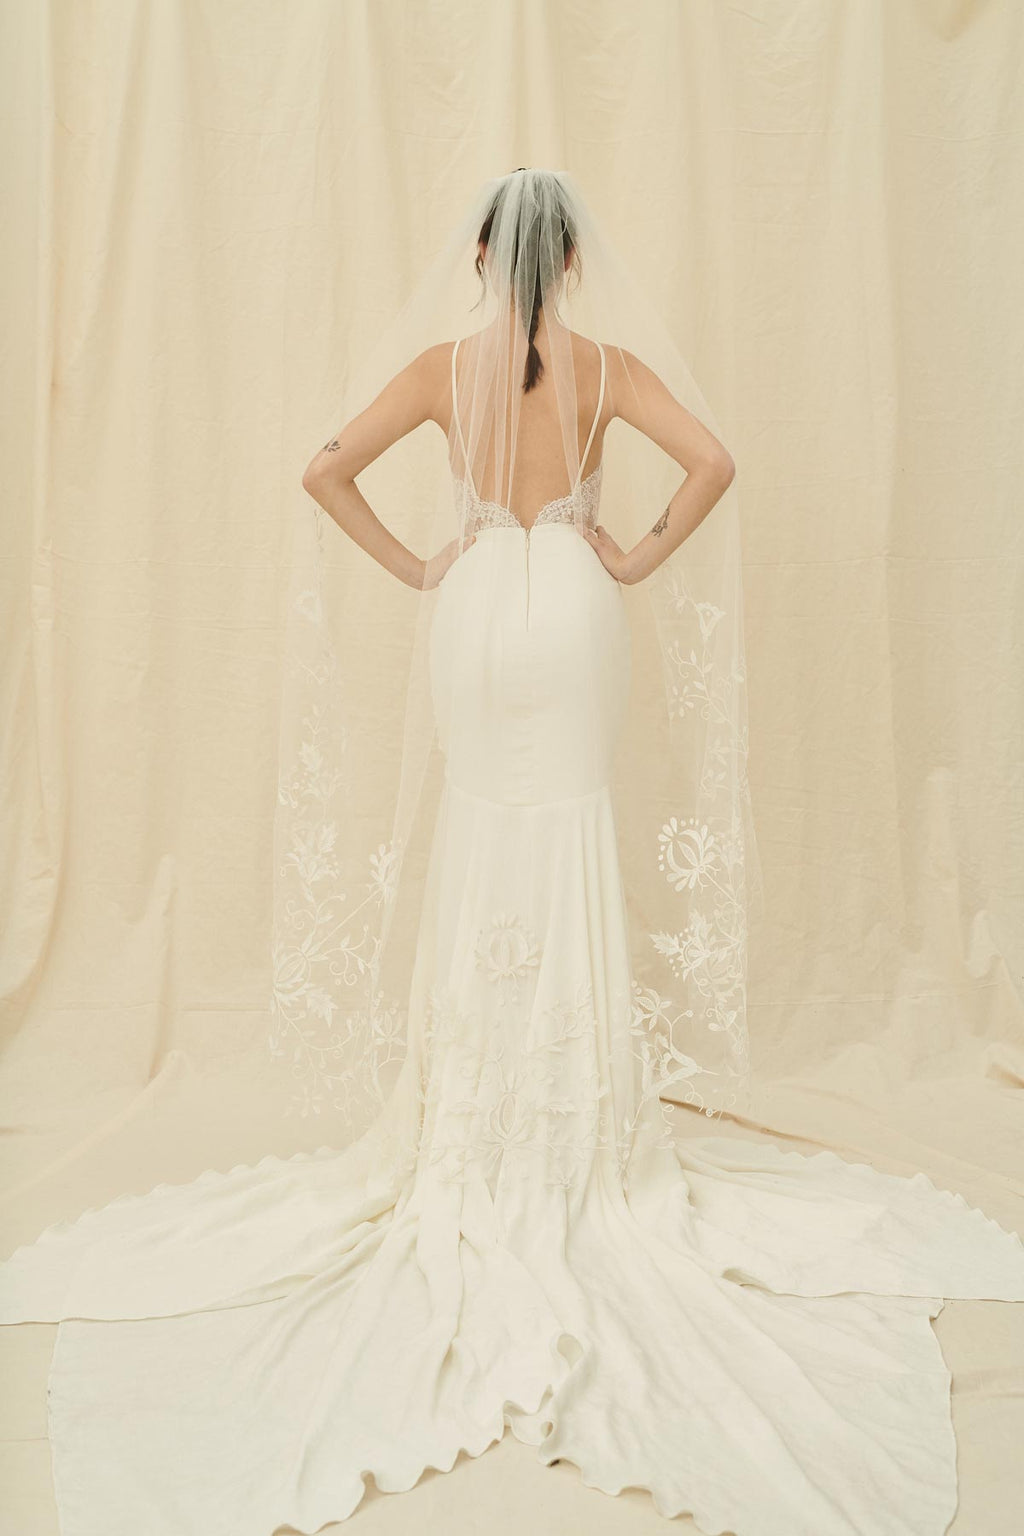 A delicate bridal veil with floral embroidery